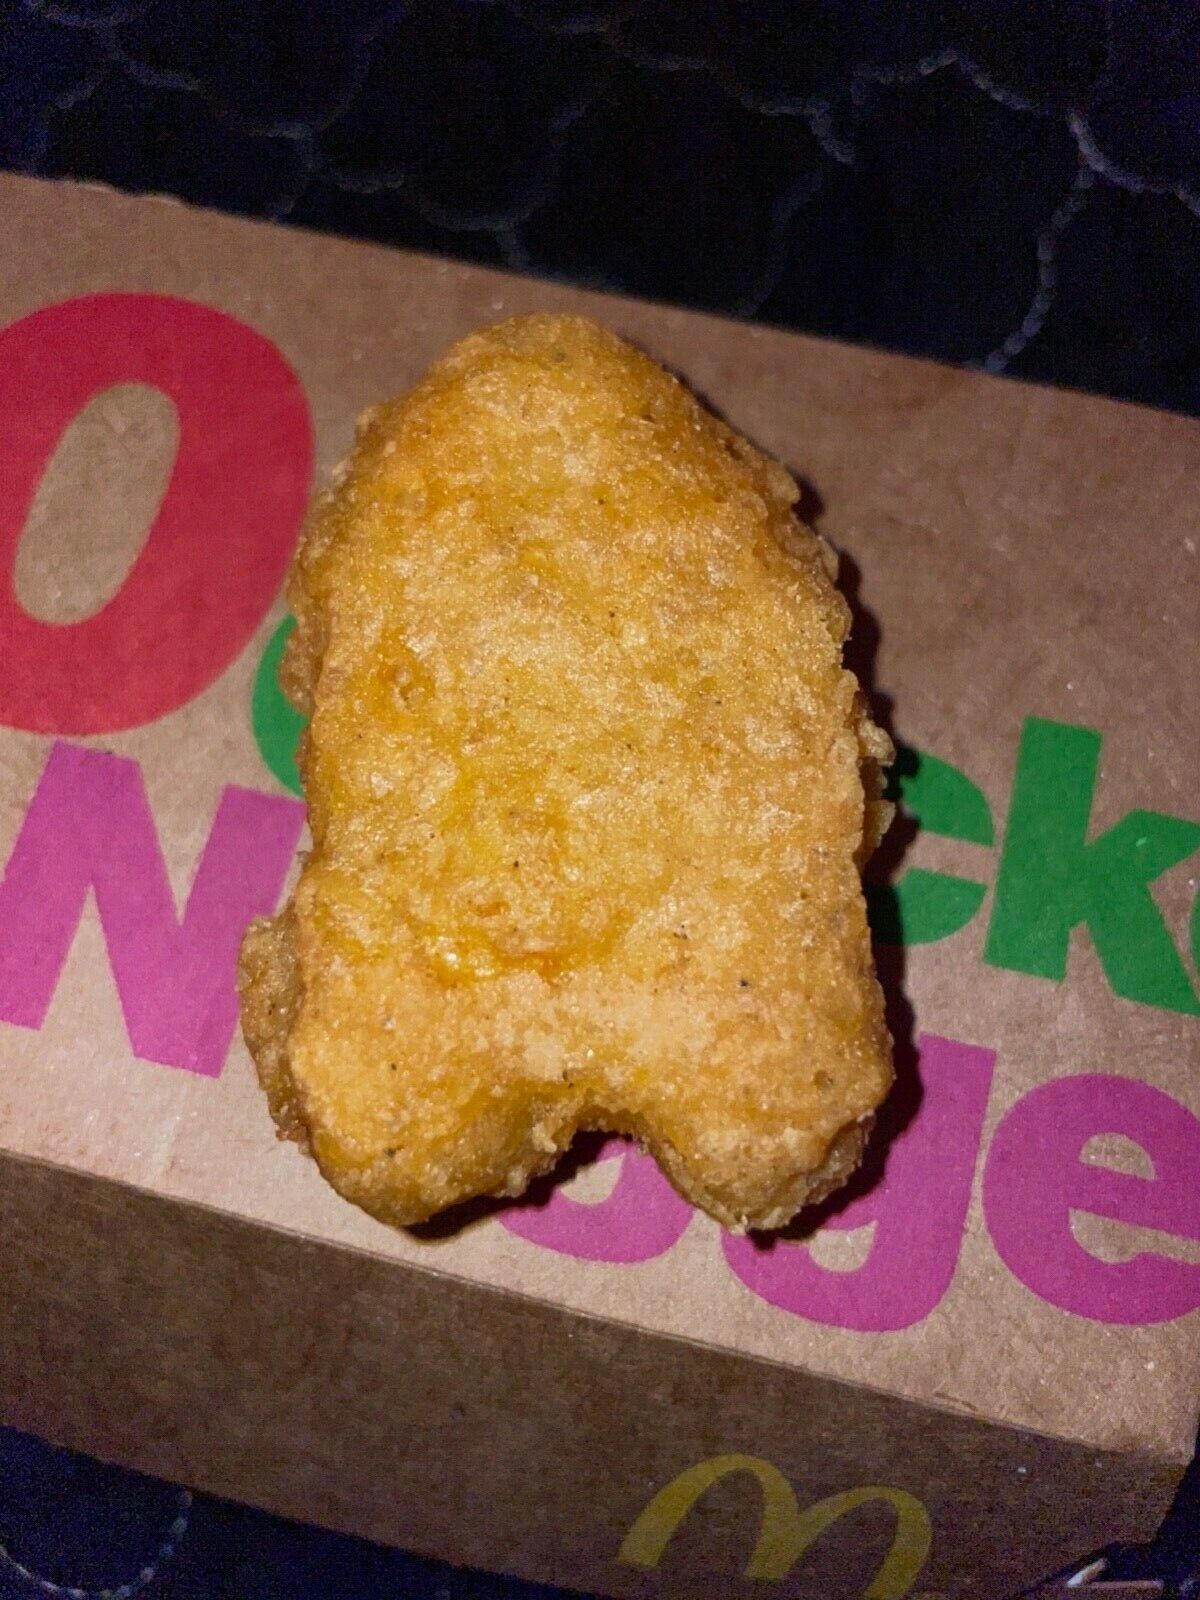 Bts Mcdonald S A Bts Meal Chicken Mcnugget That Looks Like Among Us Is Up To 30 269 69 On Ebay